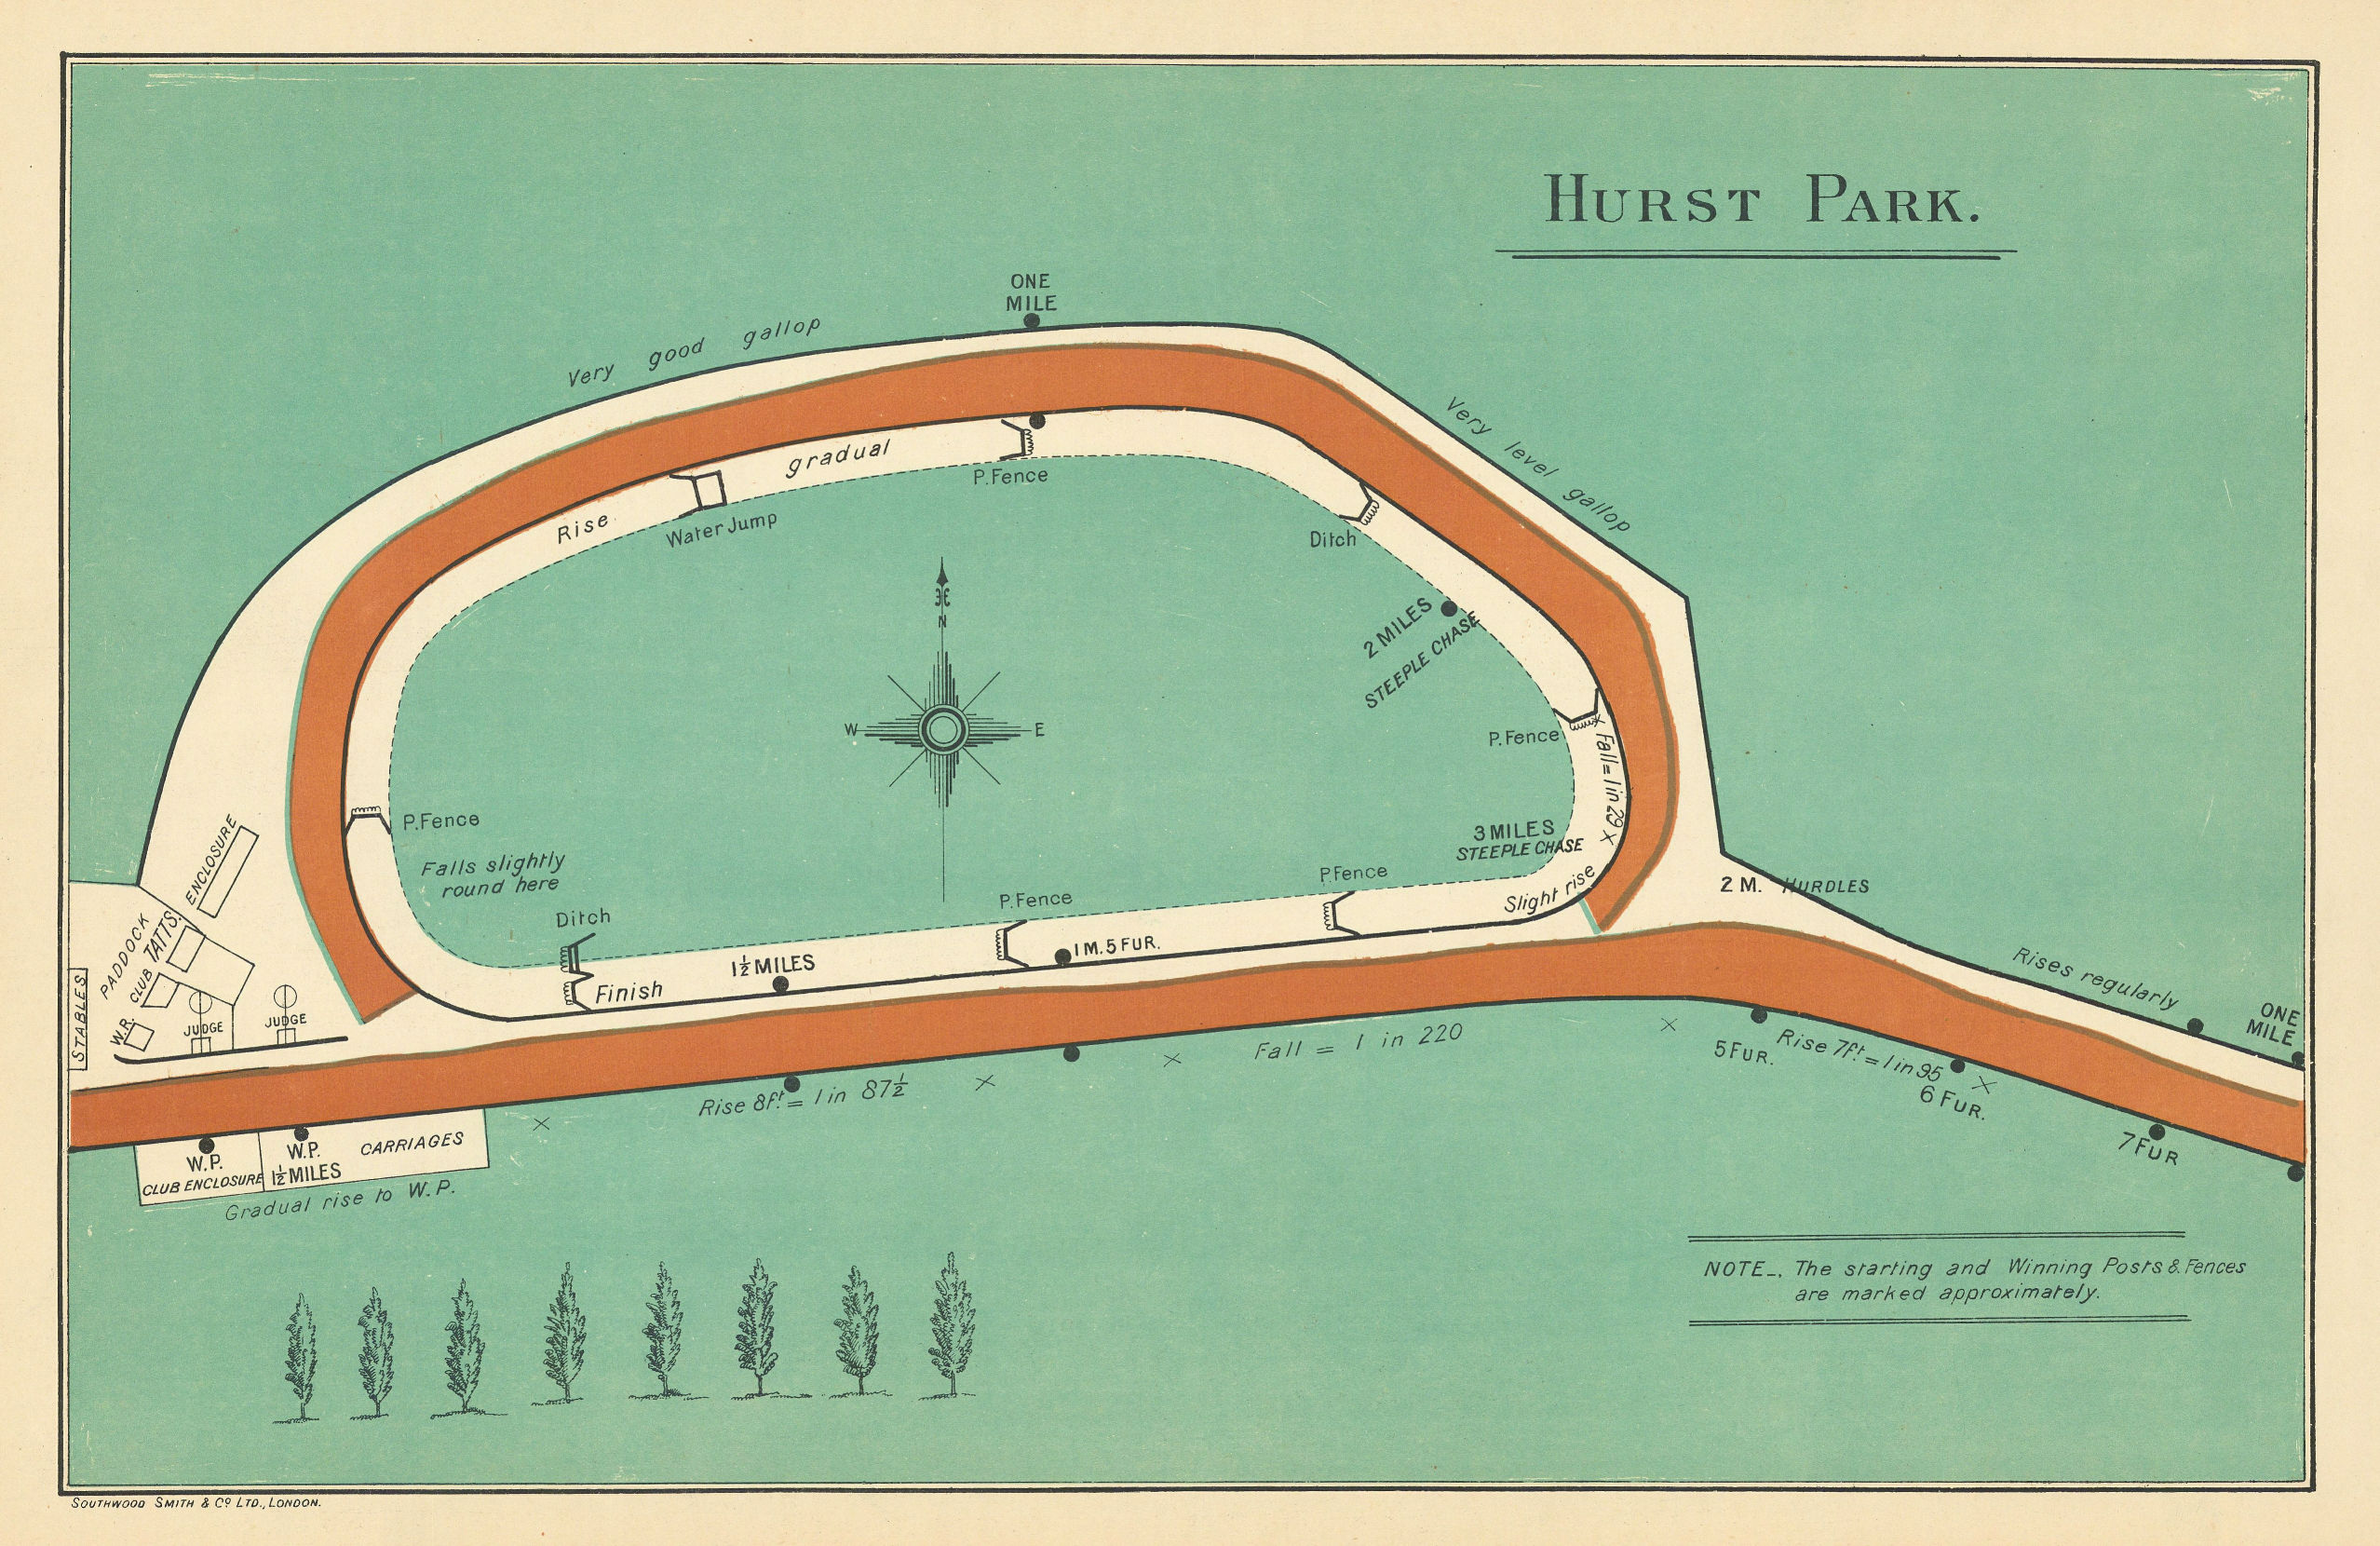 Associate Product Hurst Park racecourse, Surrey. Closed 1962. West Molesey. BAYLES 1903 old map